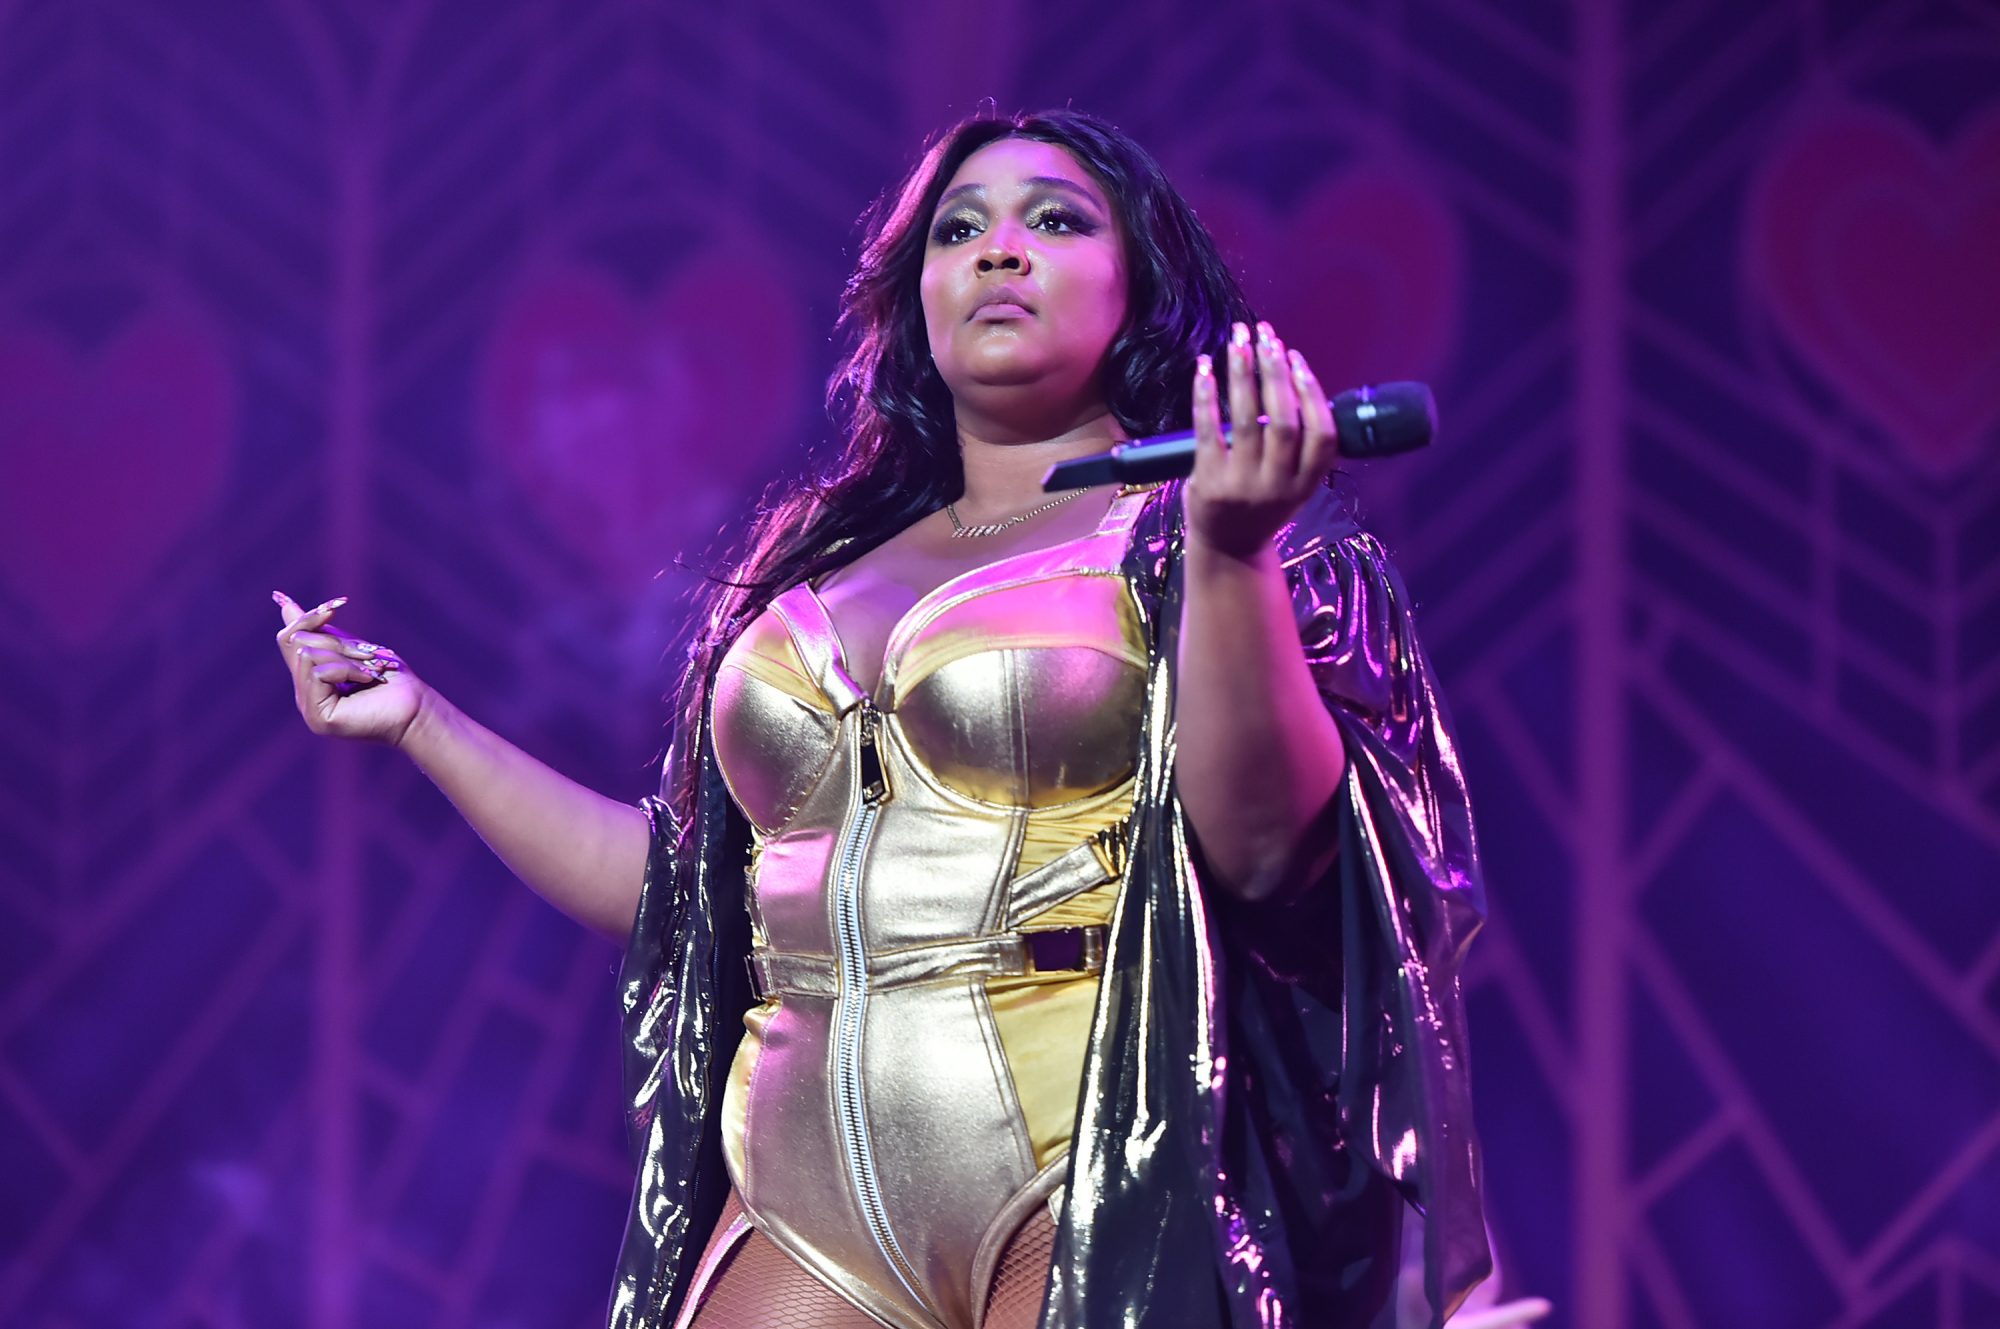 Lizzo's Music Career From Dreamer to Grammy-nominated